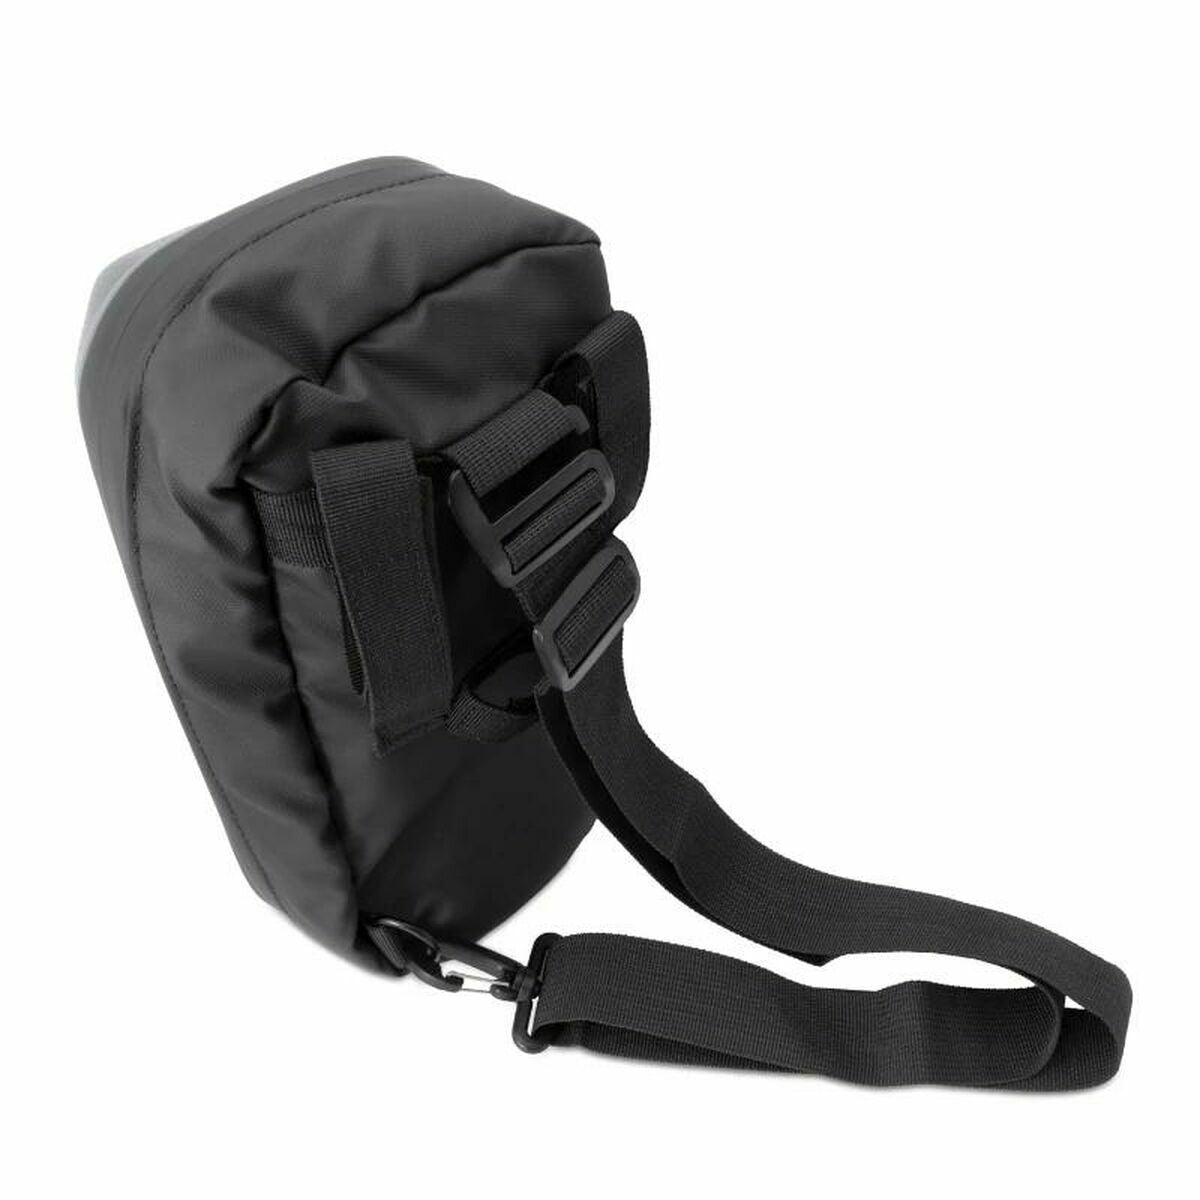 Carry bag CoolBox COO-BAG-MOB01 Black, CoolBox, Sports and outdoors, Urban mobility, carry-bag-coolbox-coo-bag-mob01-black, Brand_CoolBox, category-reference-2609, category-reference-2629, category-reference-2904, category-reference-t-19681, category-reference-t-19756, category-reference-t-19876, category-reference-t-21245, category-reference-t-25387, Condition_NEW, deportista / en forma, Price_20 - 50, RiotNook